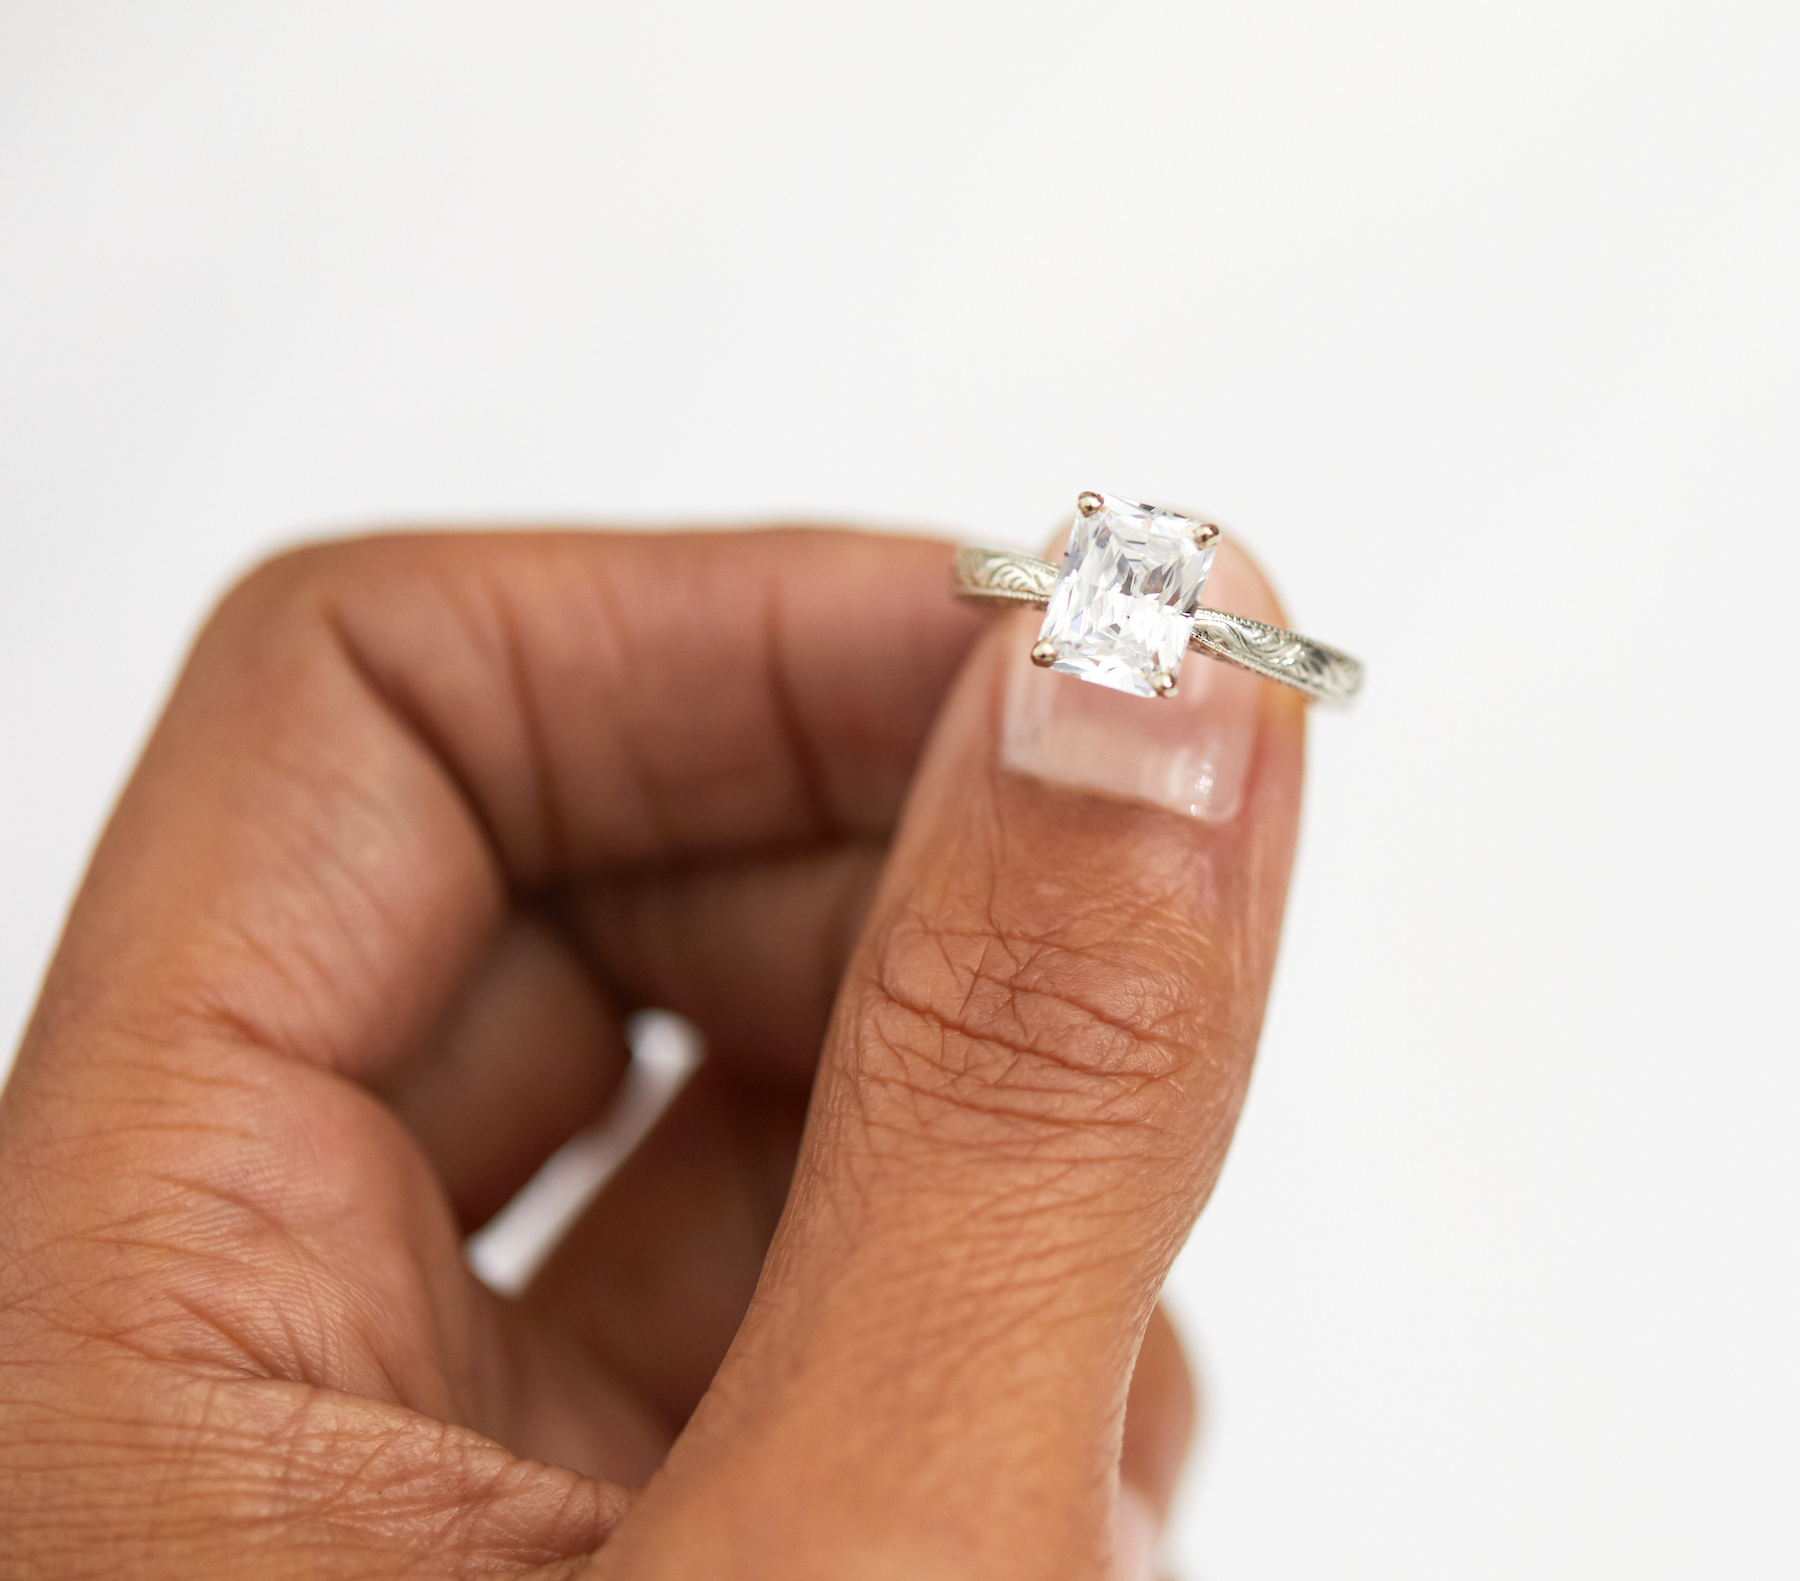 What are Square Engagement Rings?